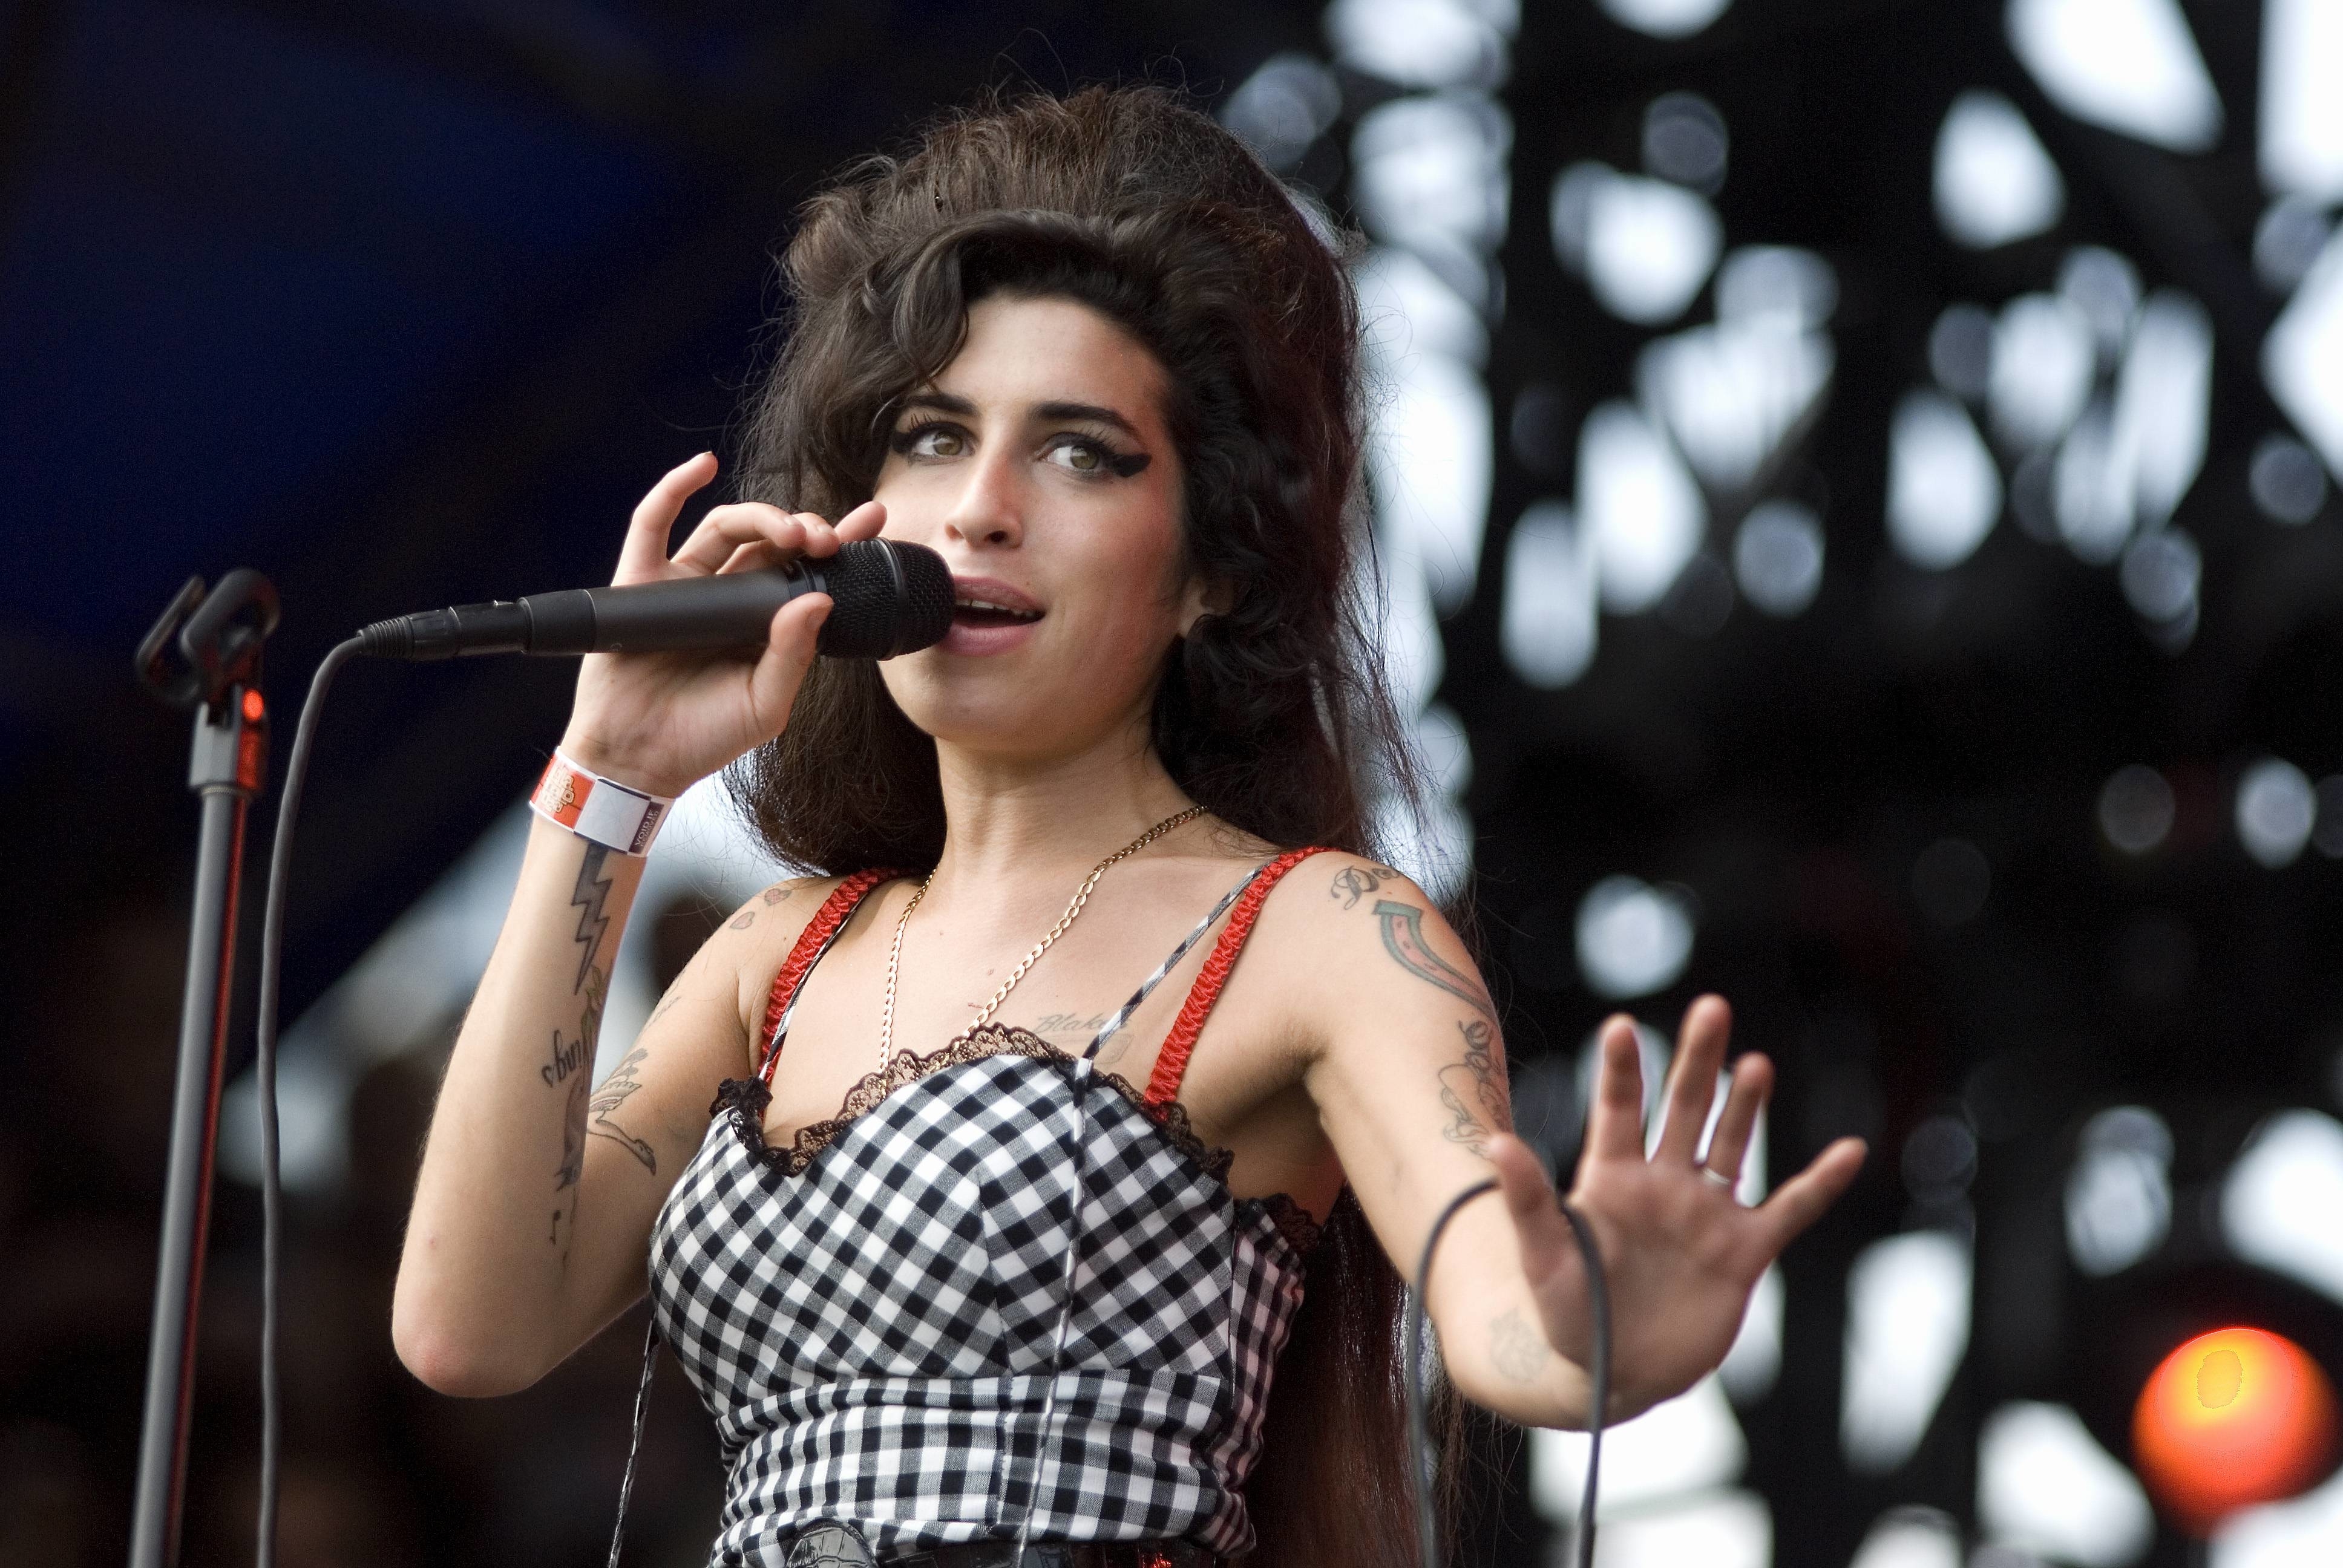 Amy Winehouse performing with a microphone, wearing a checked dress